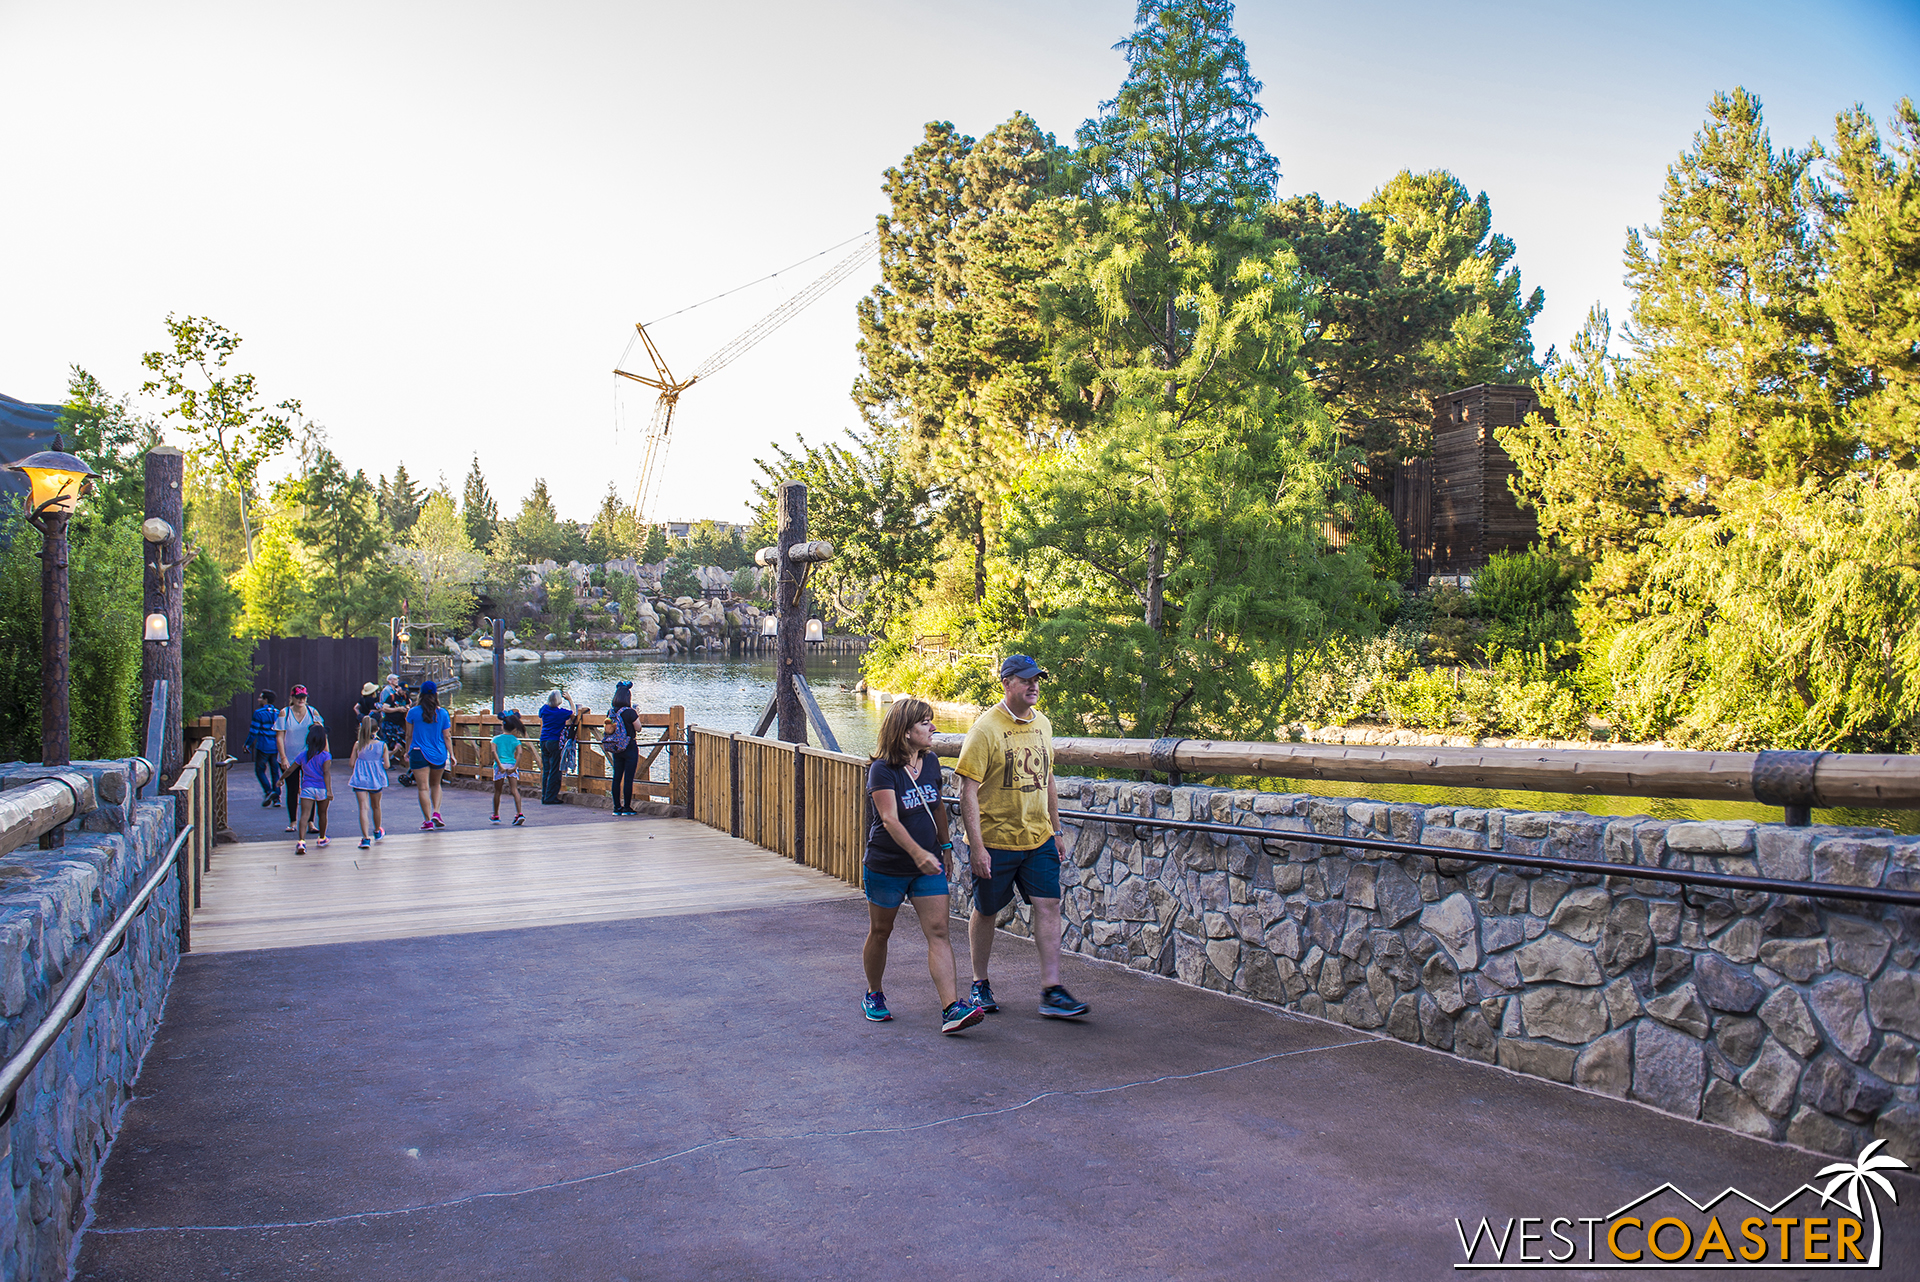  With the walls coming down, we can see a lot more of the Rivers of America! 